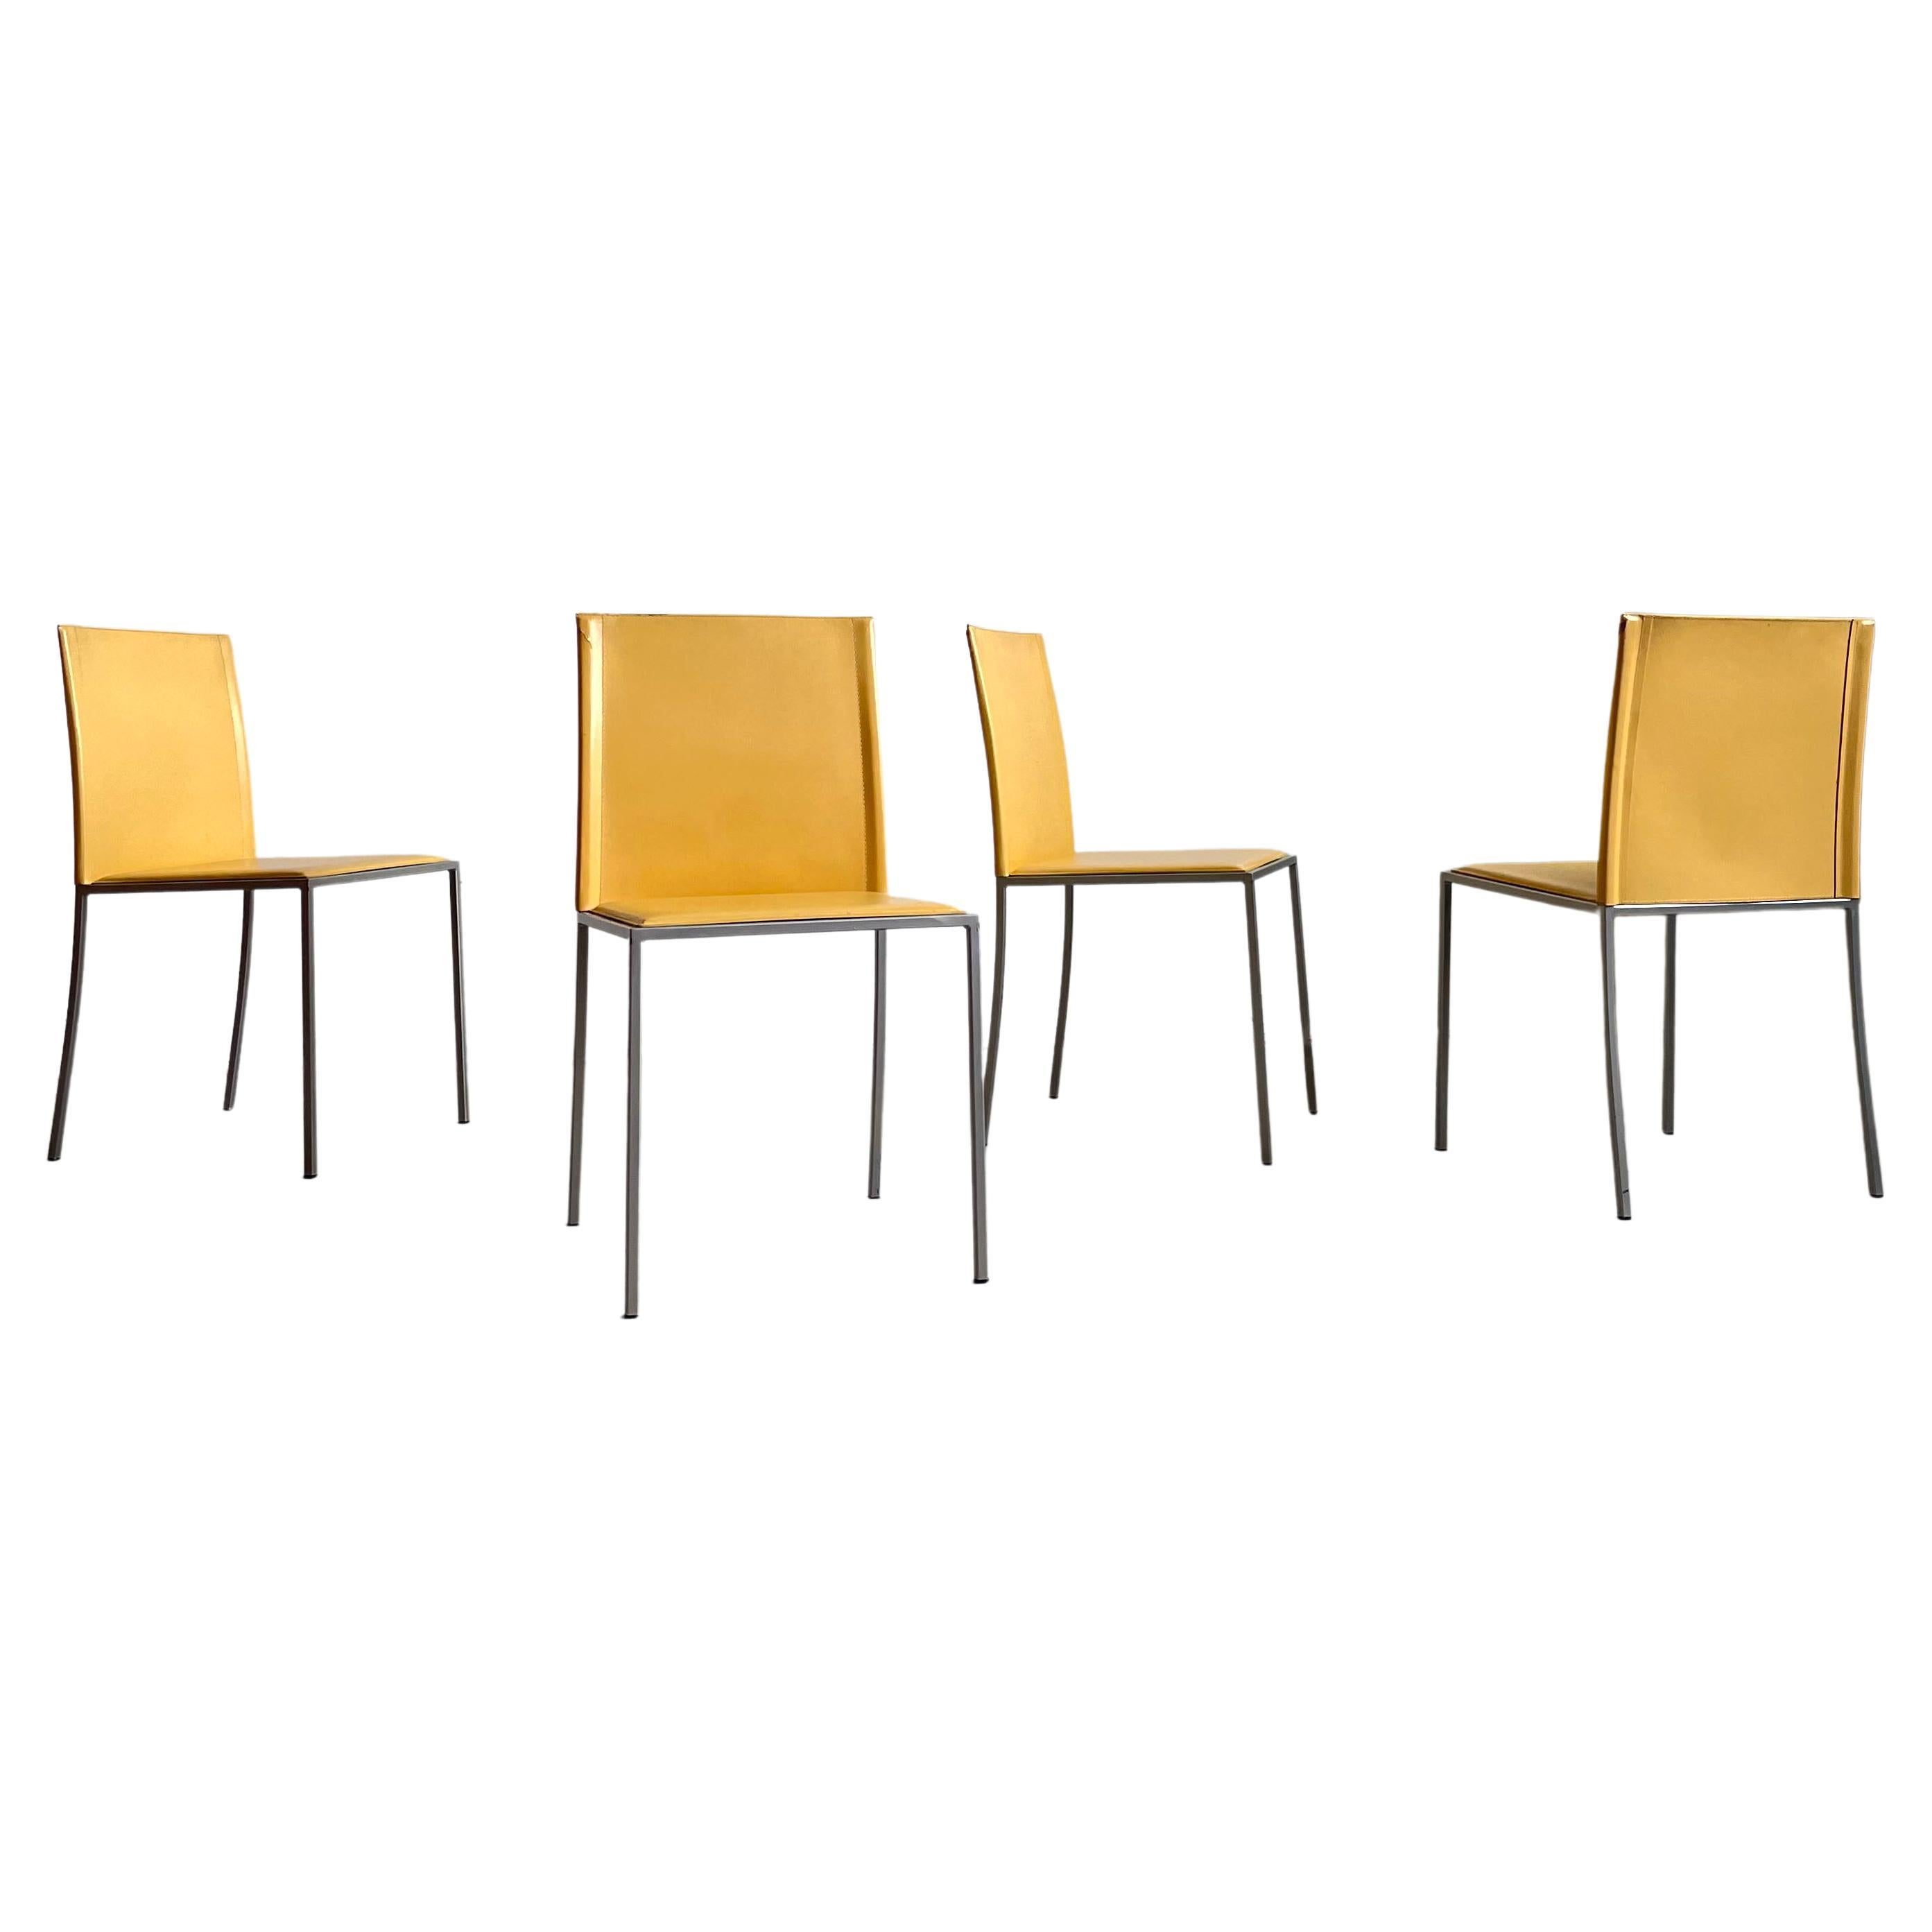 Set of 4 Italian Minimalist Modernist Leather Chairs by Calligaris, Italy 1990s For Sale